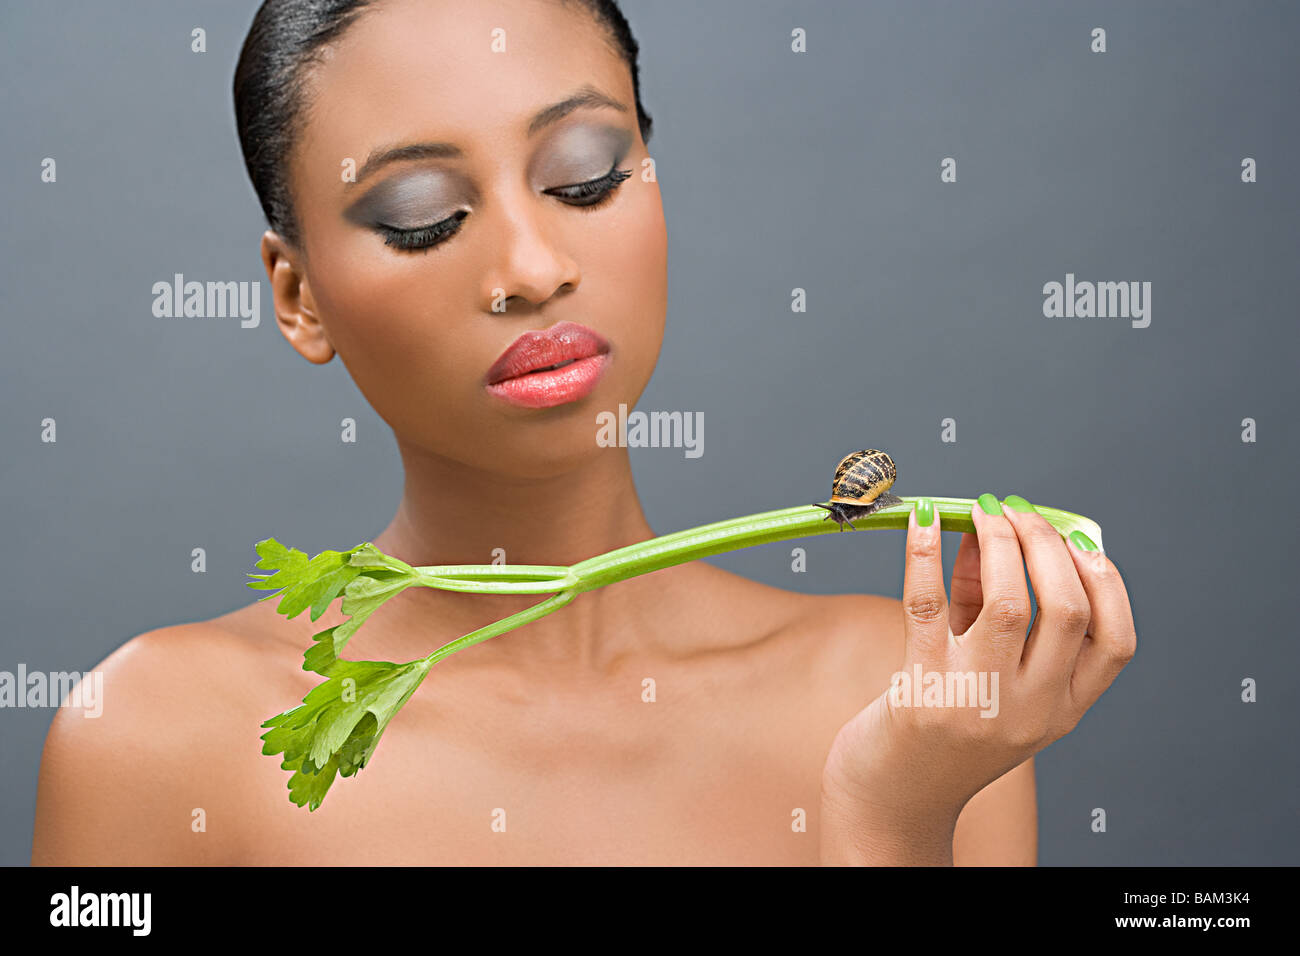 Woman looking at a snail on a stick of celery Stock Photo